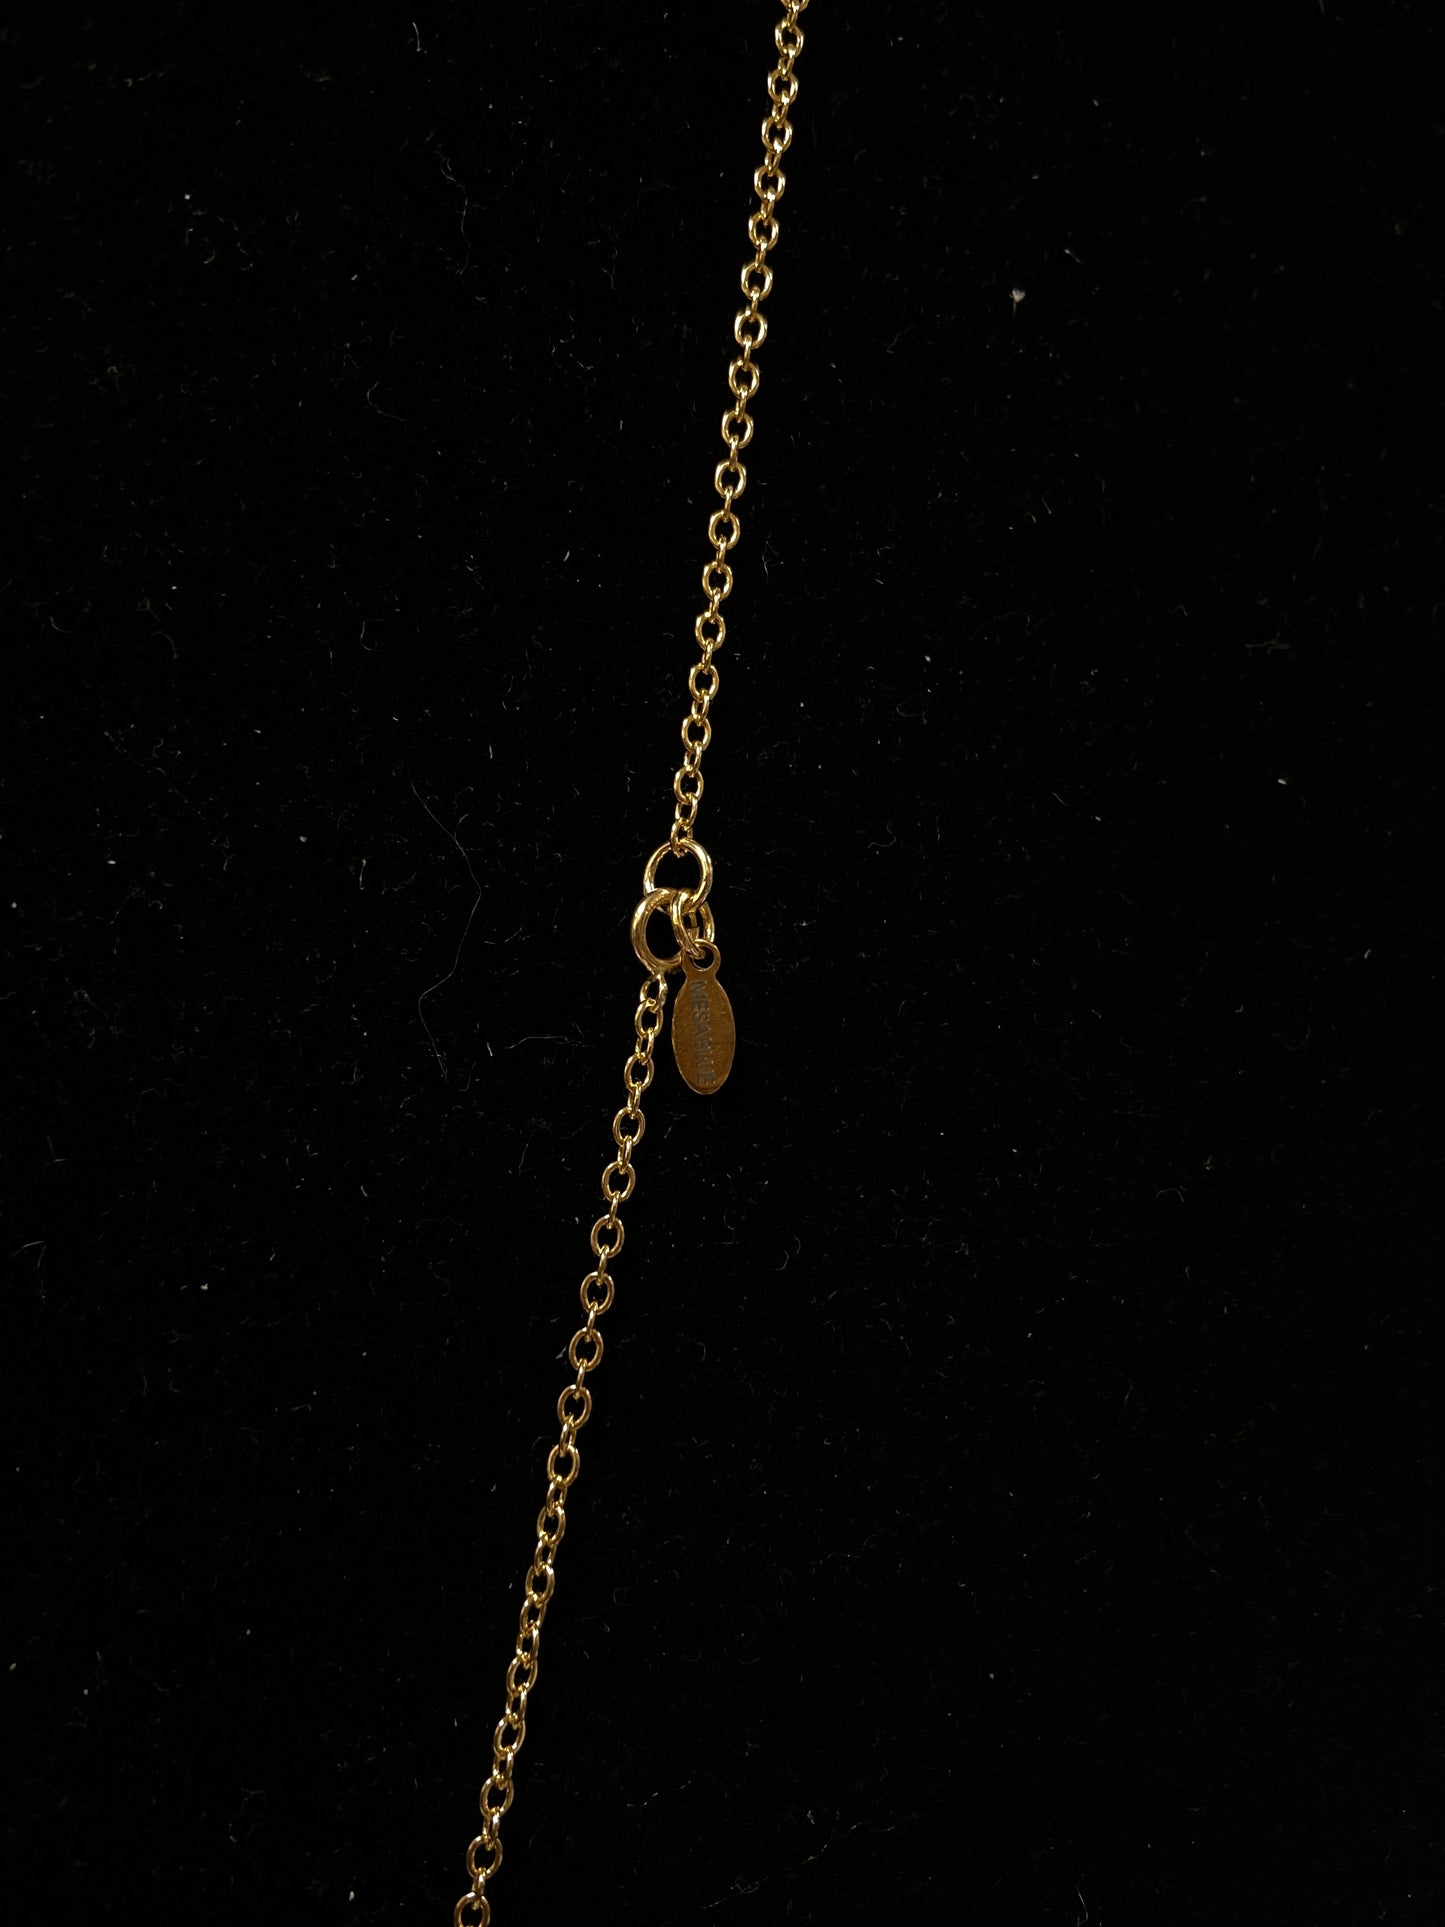 Necklace Pendant By Cmc